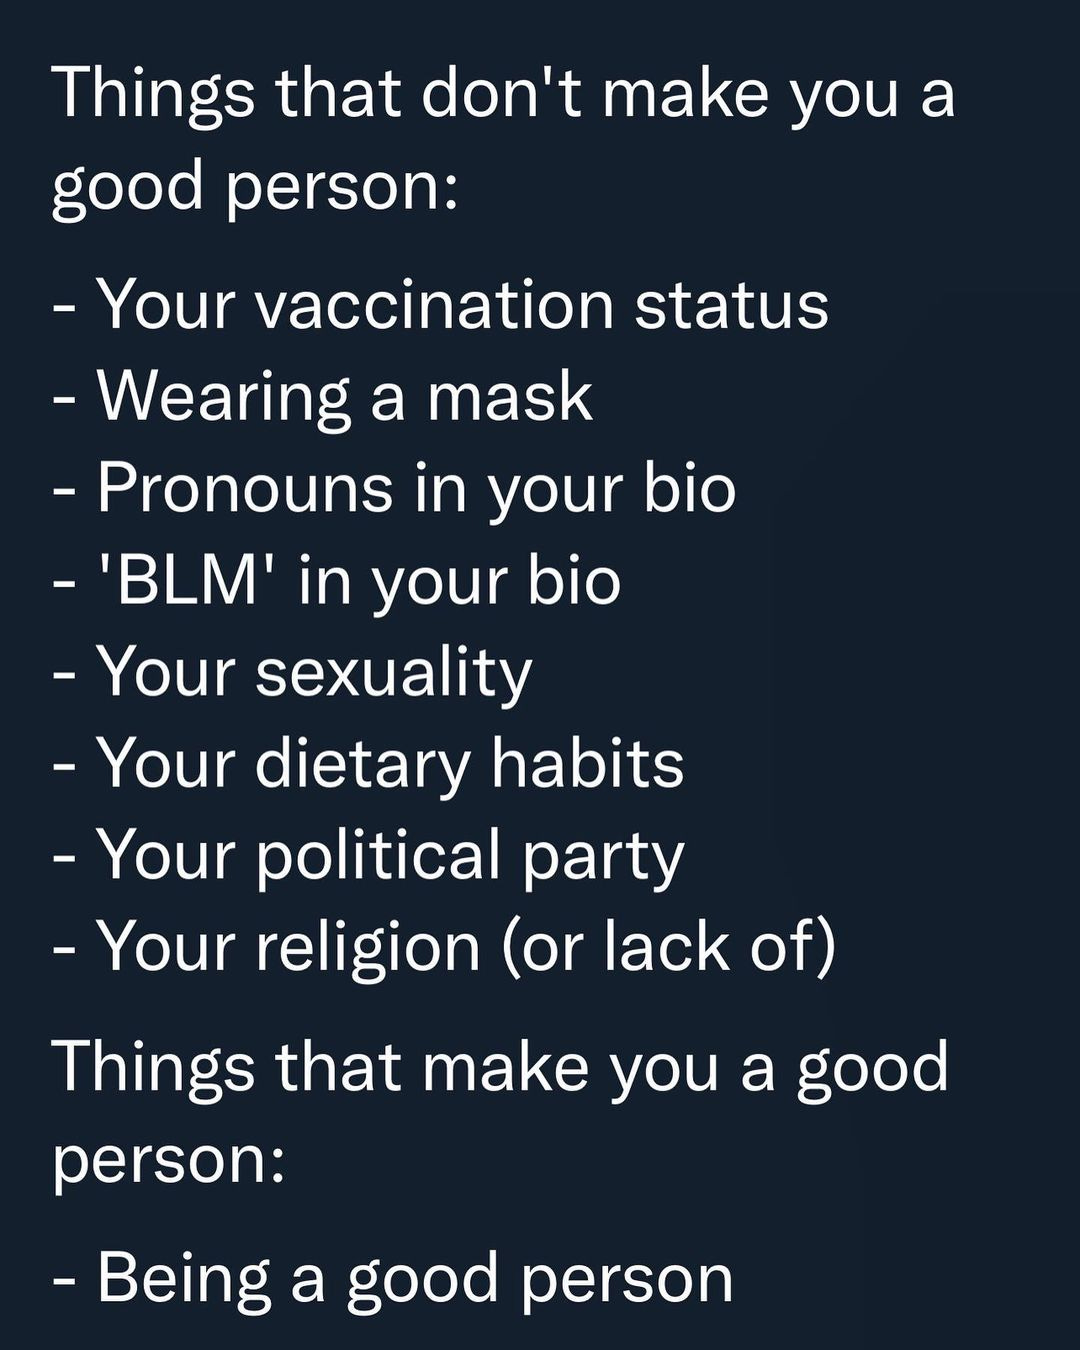 May be an image of text that says 'Things that don't make you a good person: -Your vaccination status -Wearing a mask -Pronouns in your bio -'BLM in your bio -Your sexuality -Your dietary habits -Your political party -Your religion (or lack of) Things that make you a good person: -Being a good person'